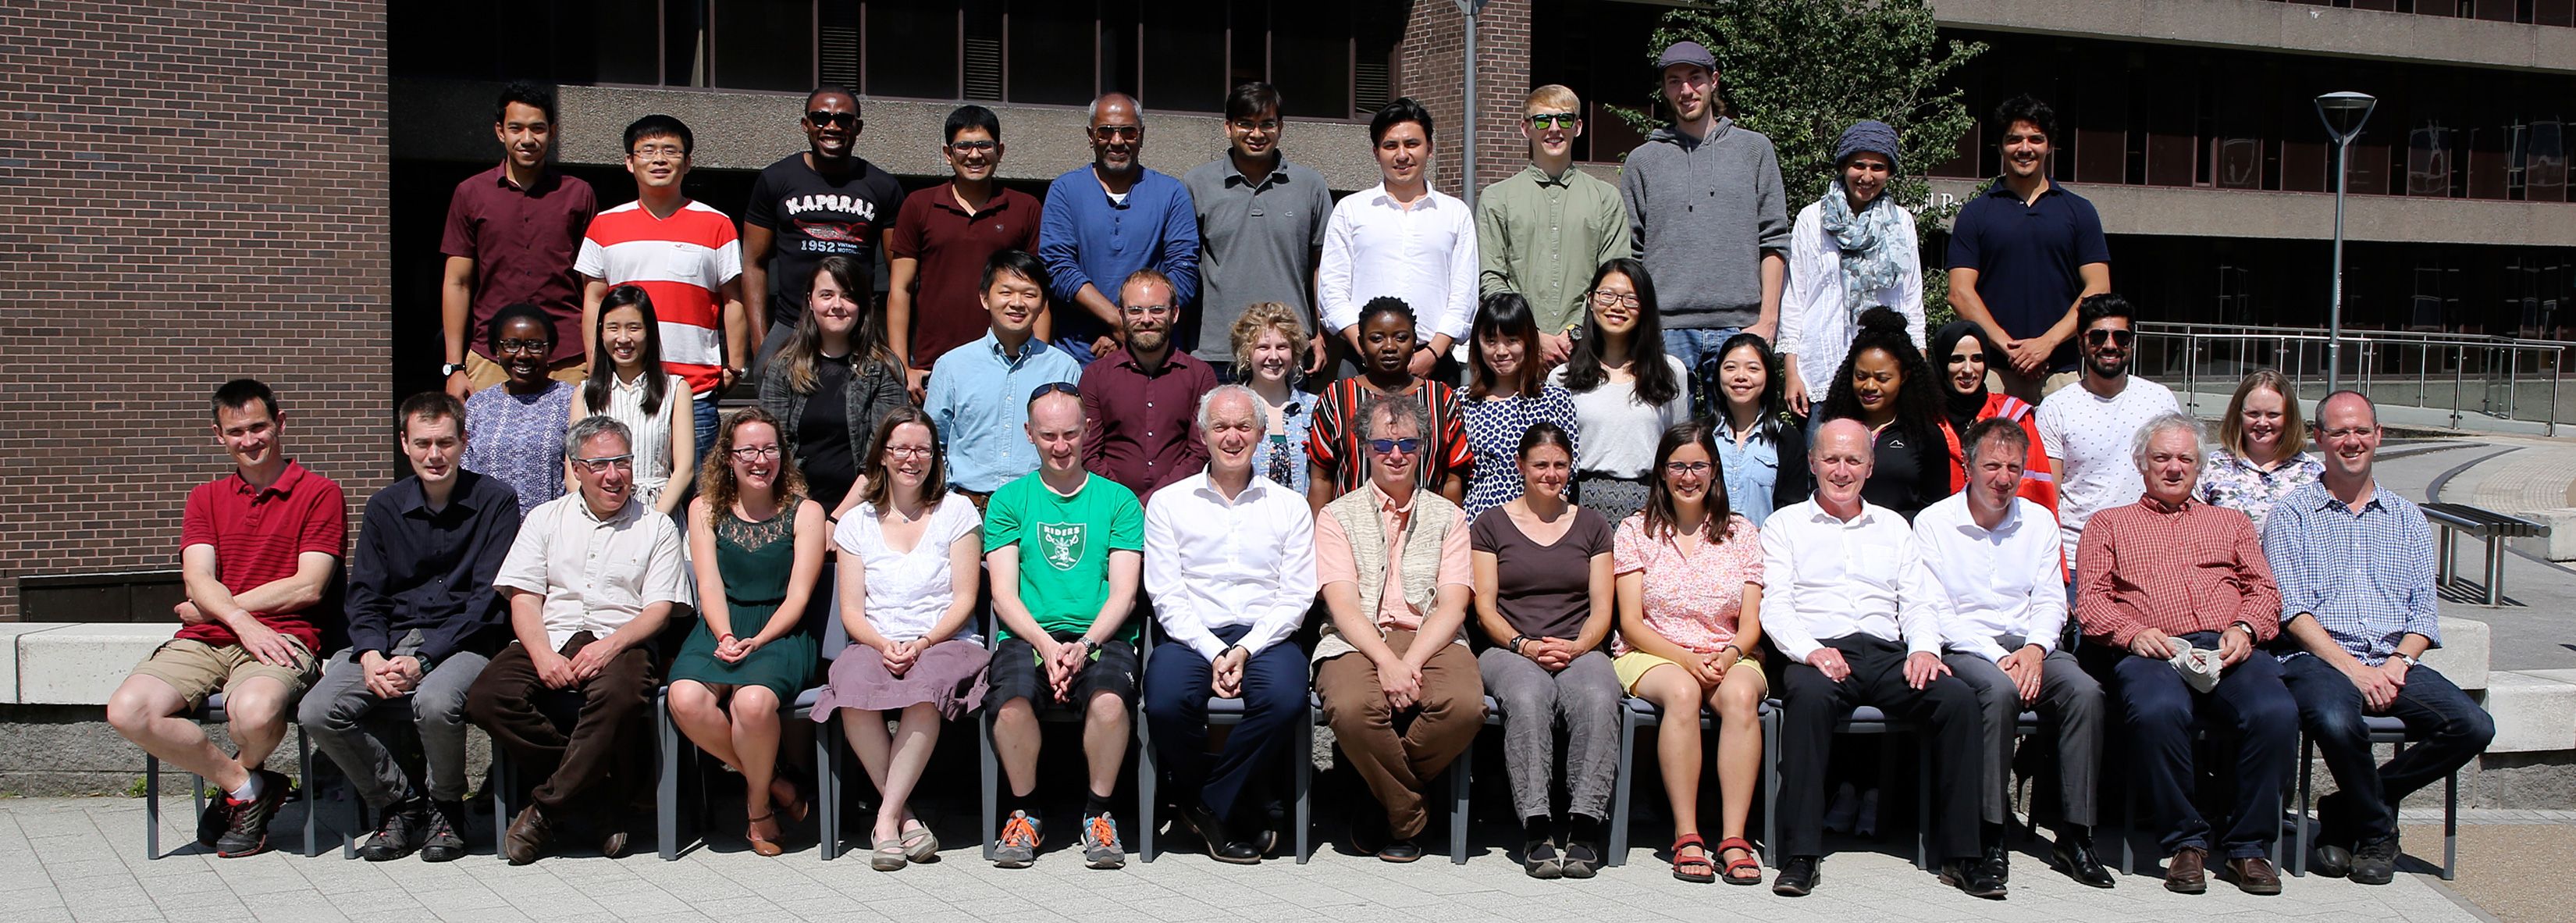 Geography Department Postgraduate Group Photo from 2018